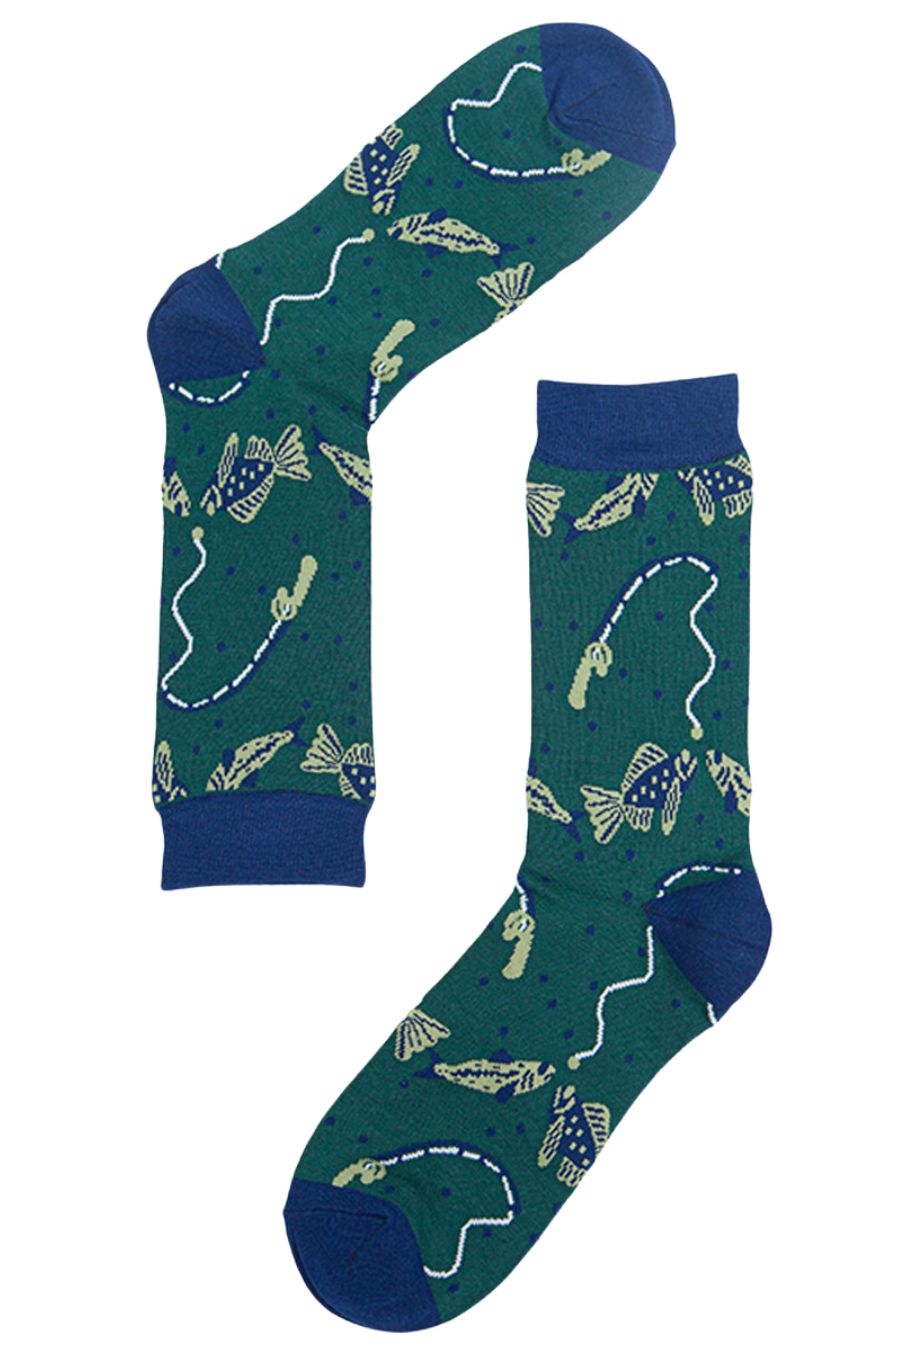 green, blue dress socks with fish and a fishing line